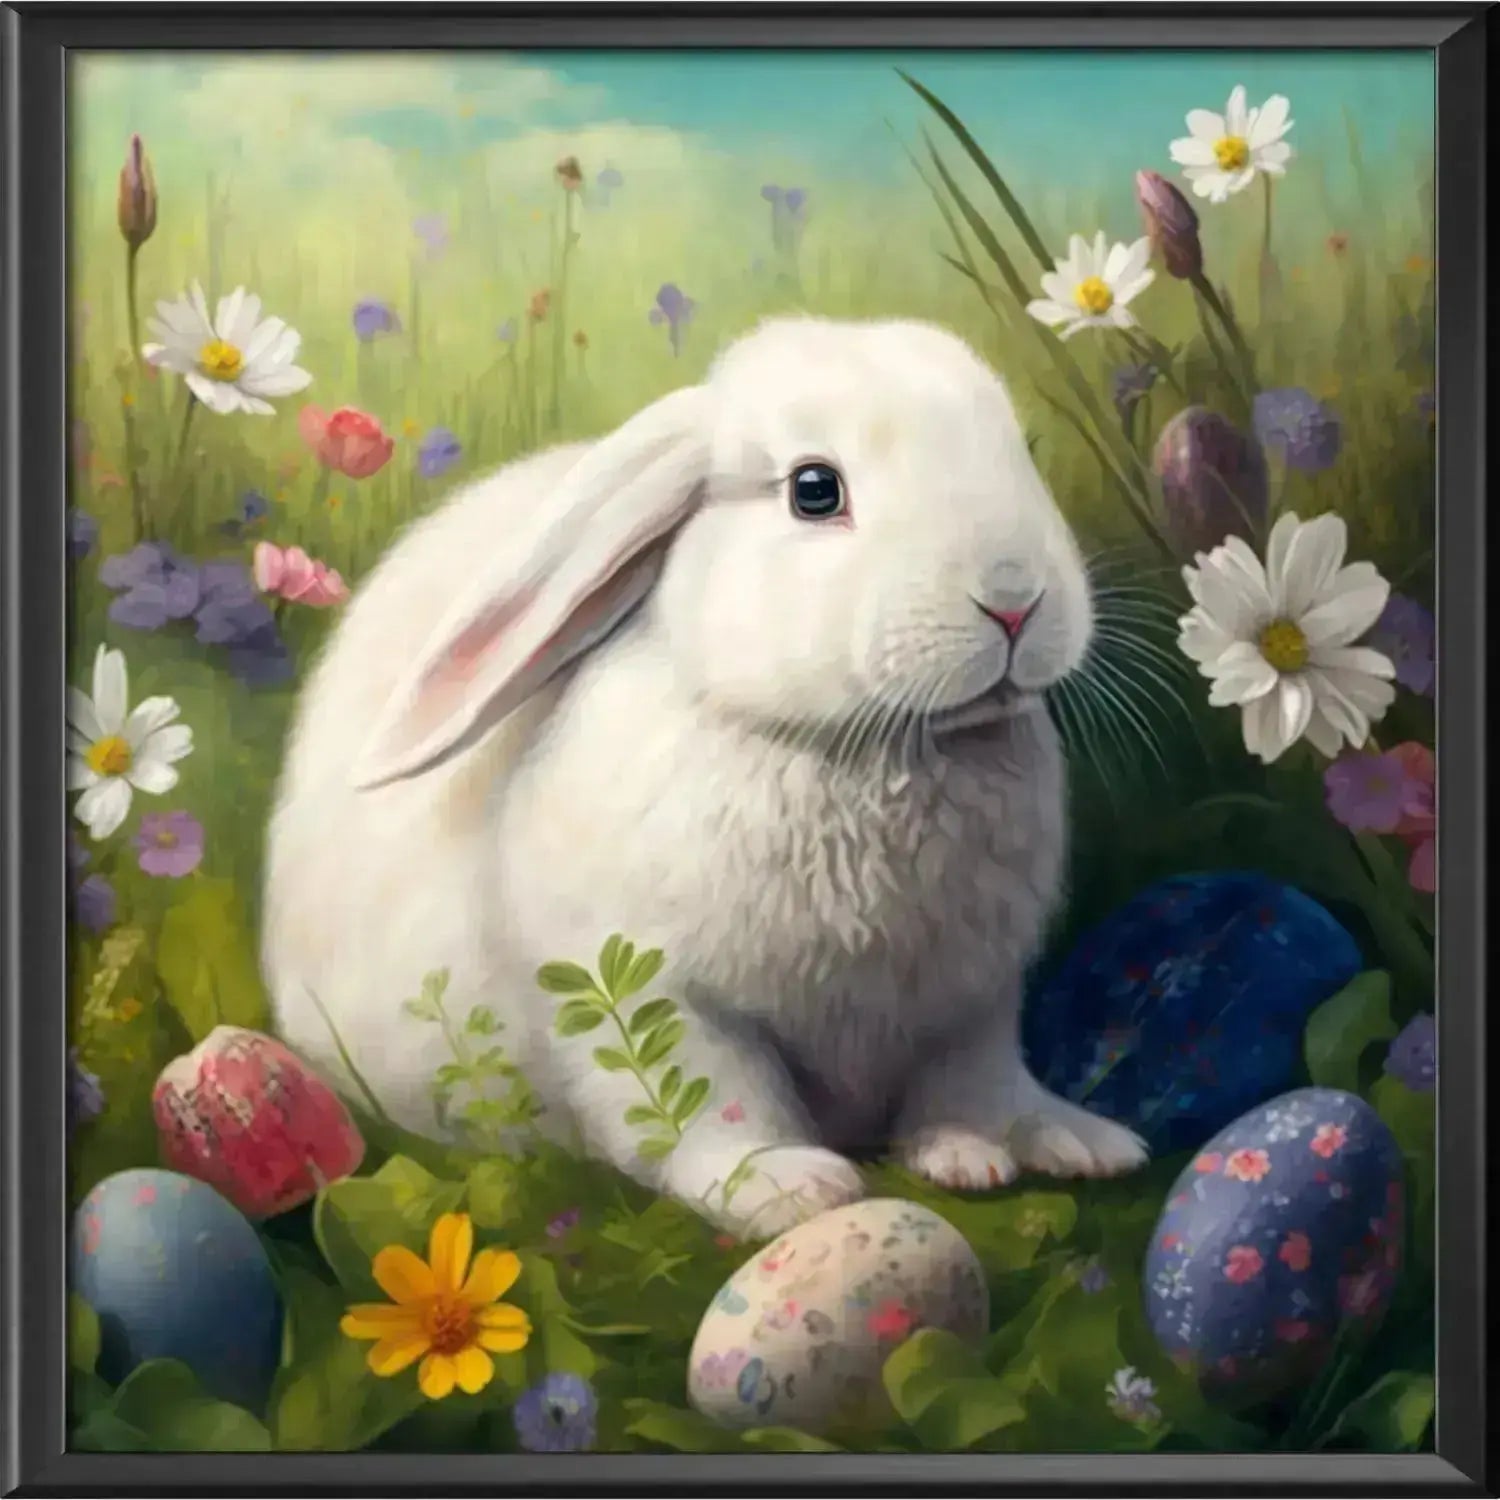  Easter Bunny Diamond Painting Kits Fall And Winter Gift For All  Beginners,Round Diamonds Embroidery Painting Art On Canvas 5d Diamond  Painting 18x25 In Taste Living Room Decor Store Club Decor